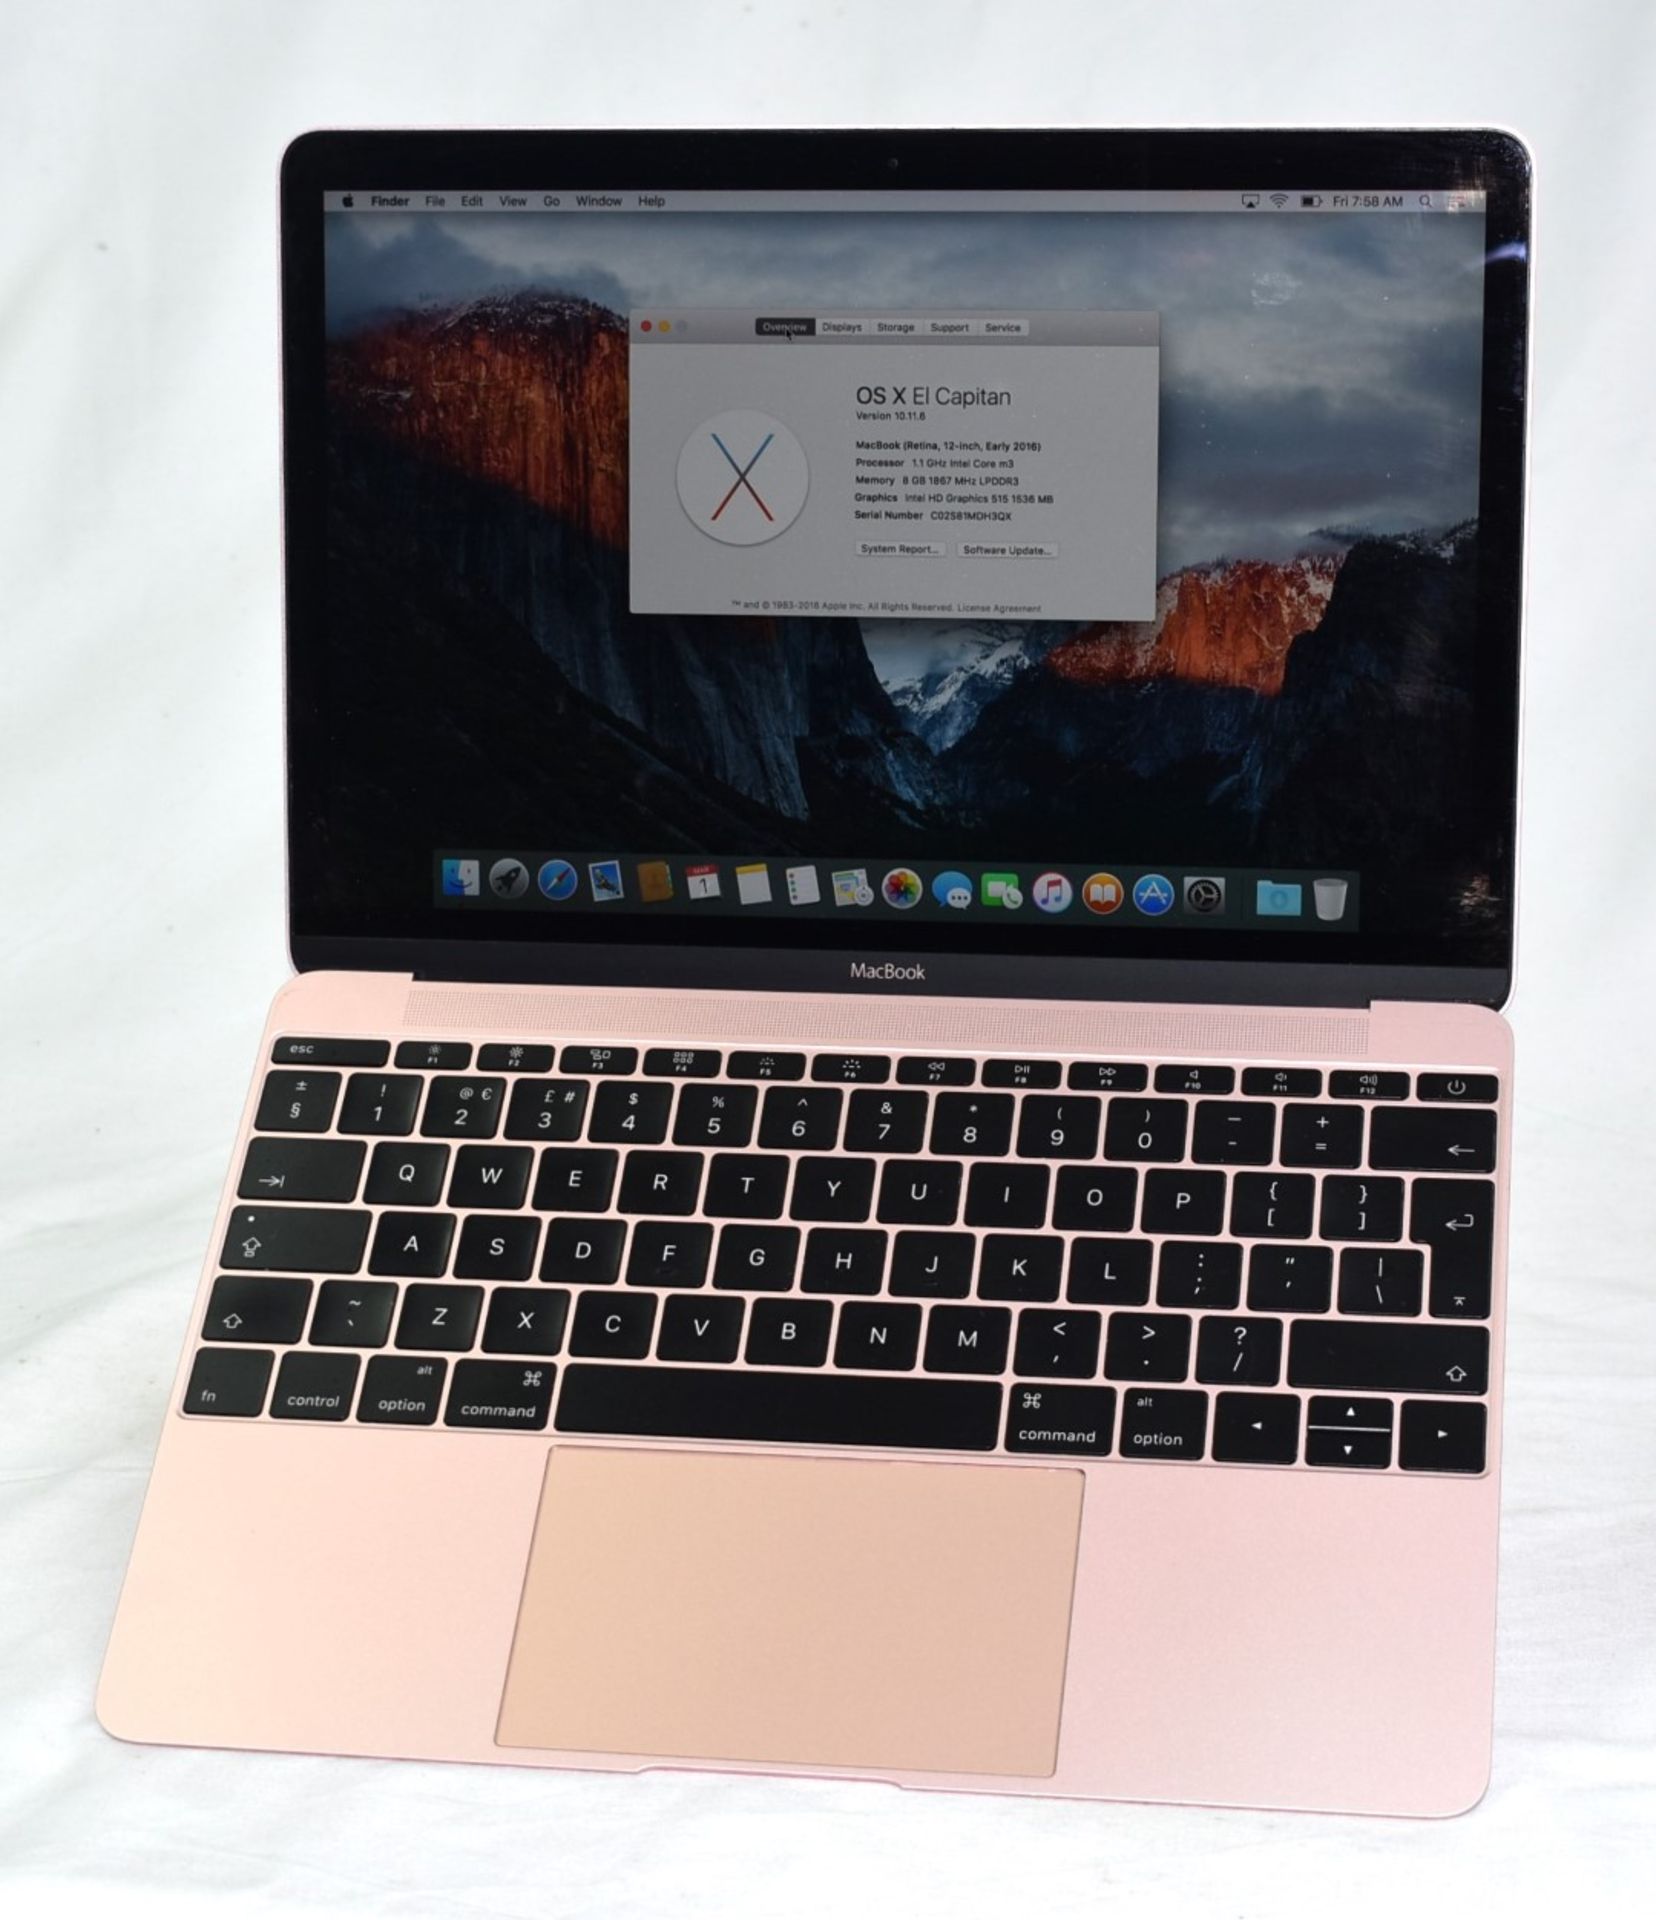 1 x 2016 12 Inch Apple MacBook Featuring an Intel M3 Processor, 8GB Ram and a 250GB SSD - Image 2 of 19